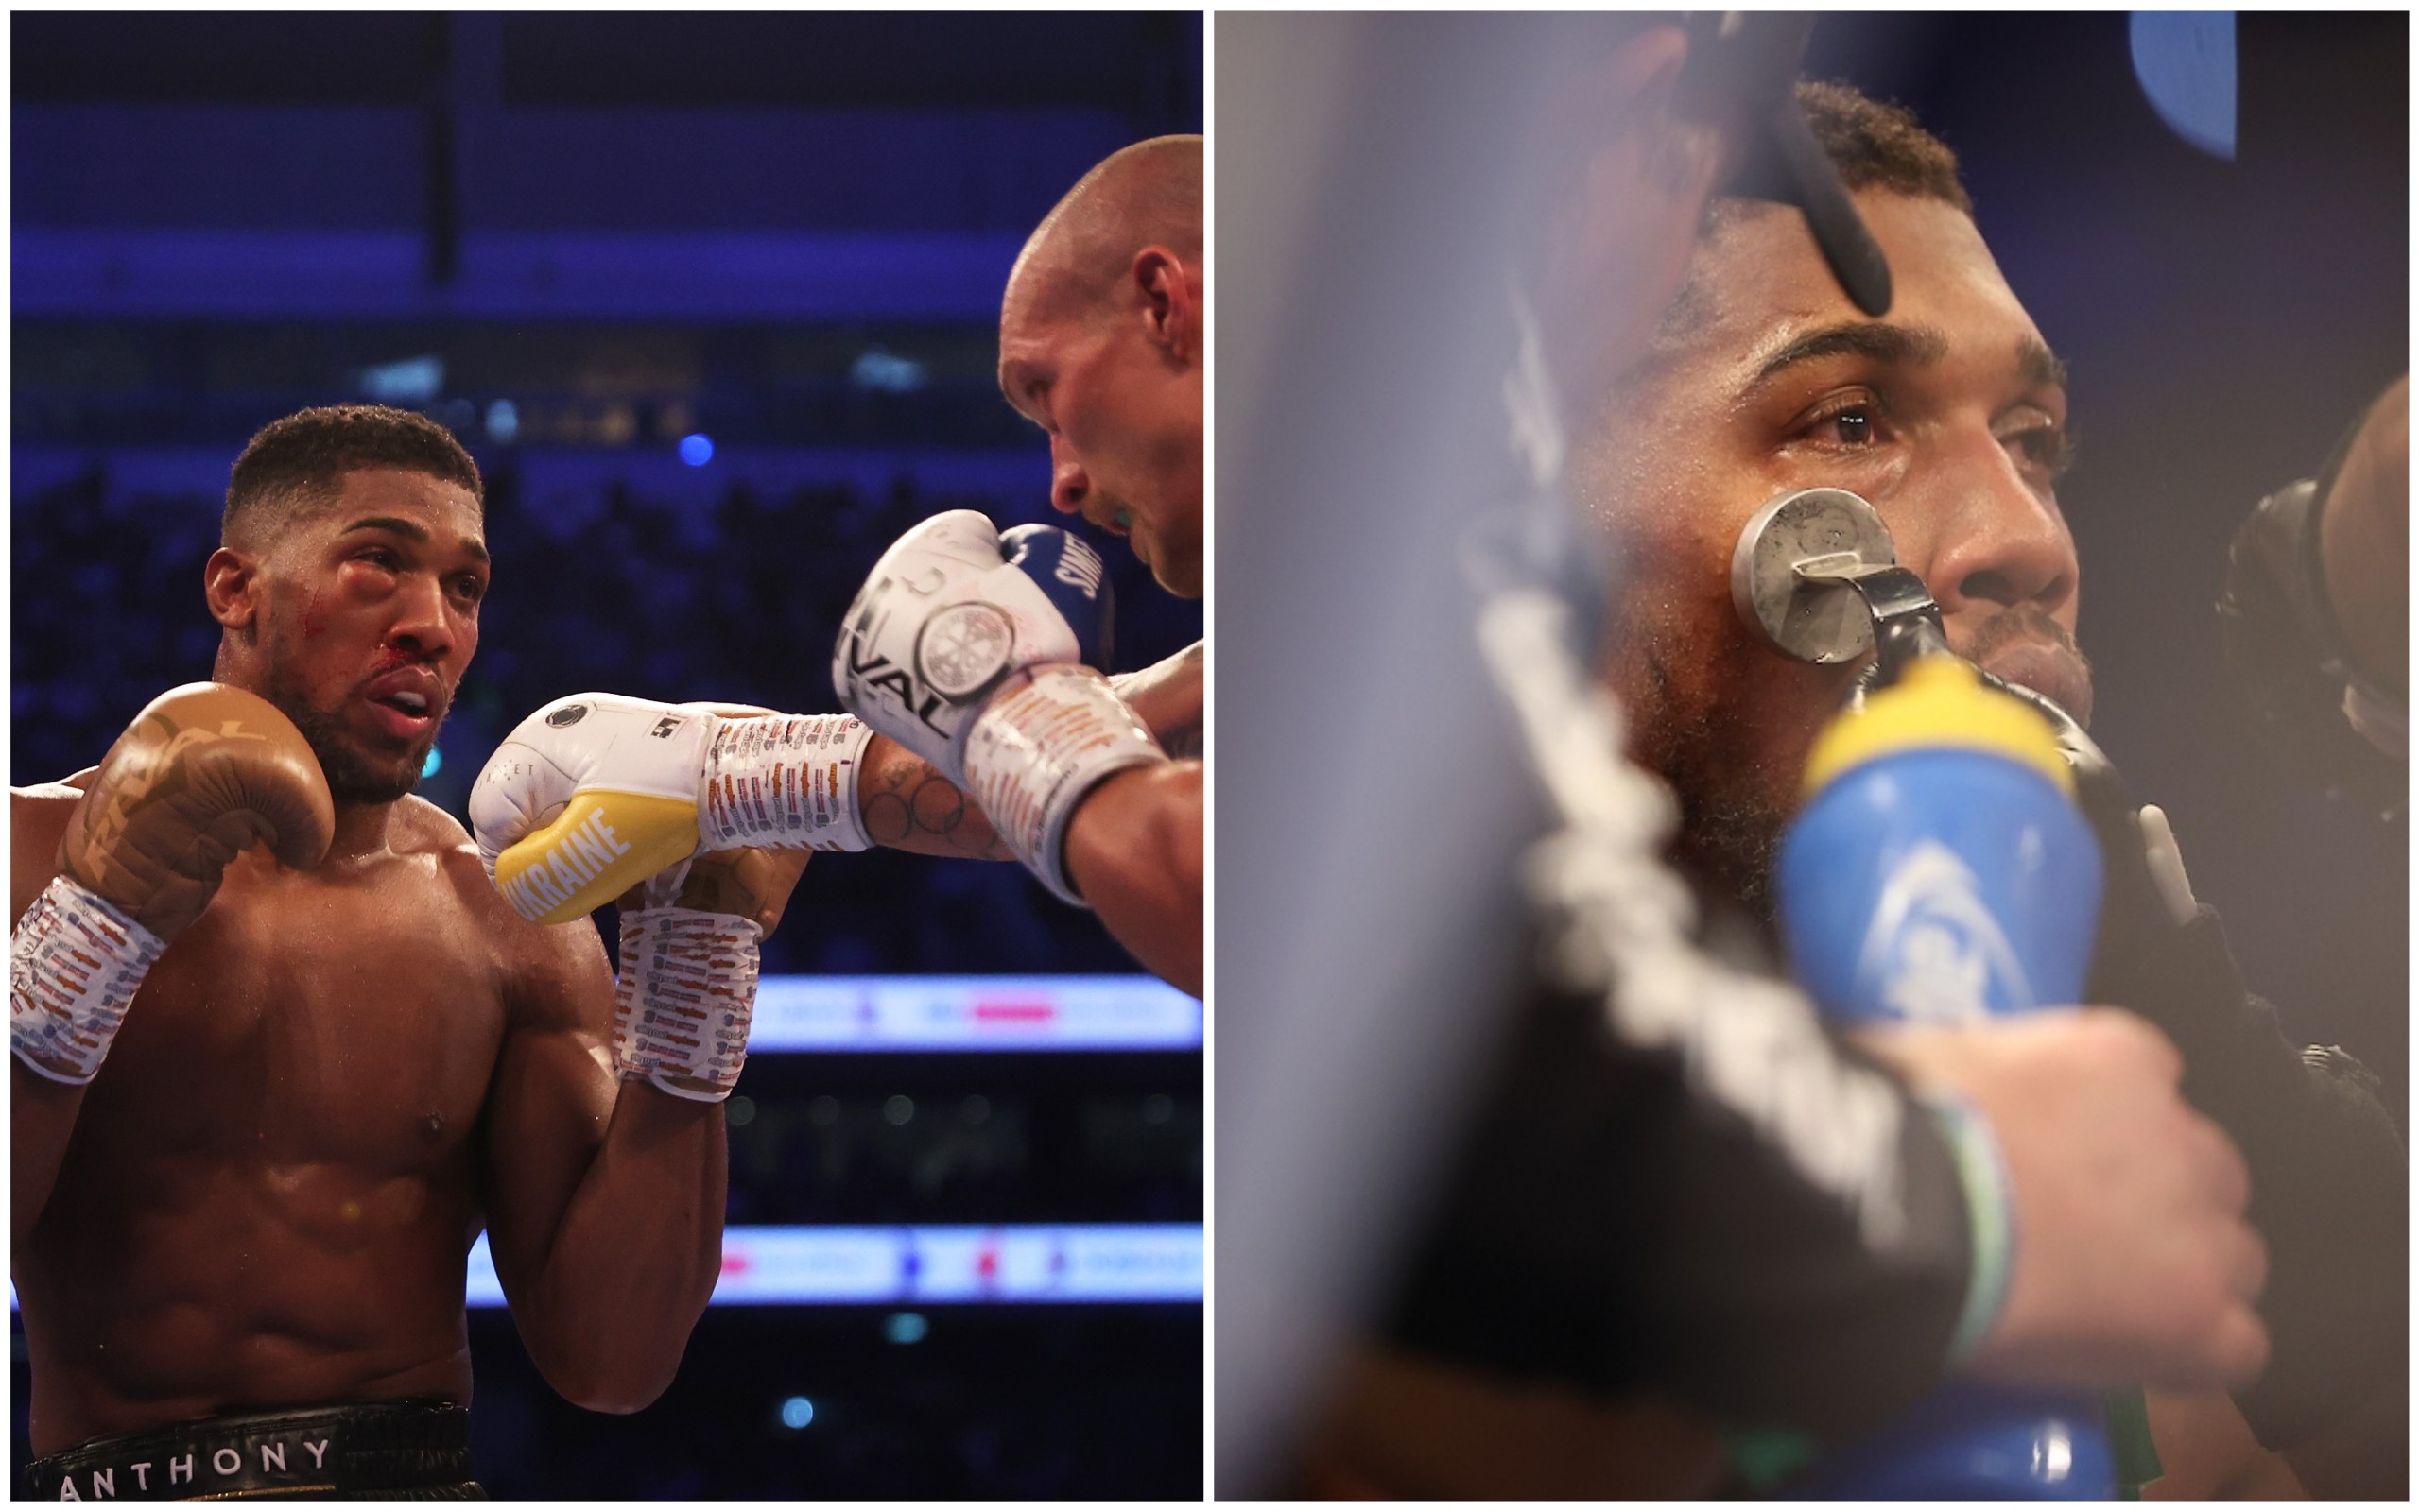 ‘It doesn’t look great’ – Eddie Hearn confirms Anthony Joshua has been taken to hospital with eye injury